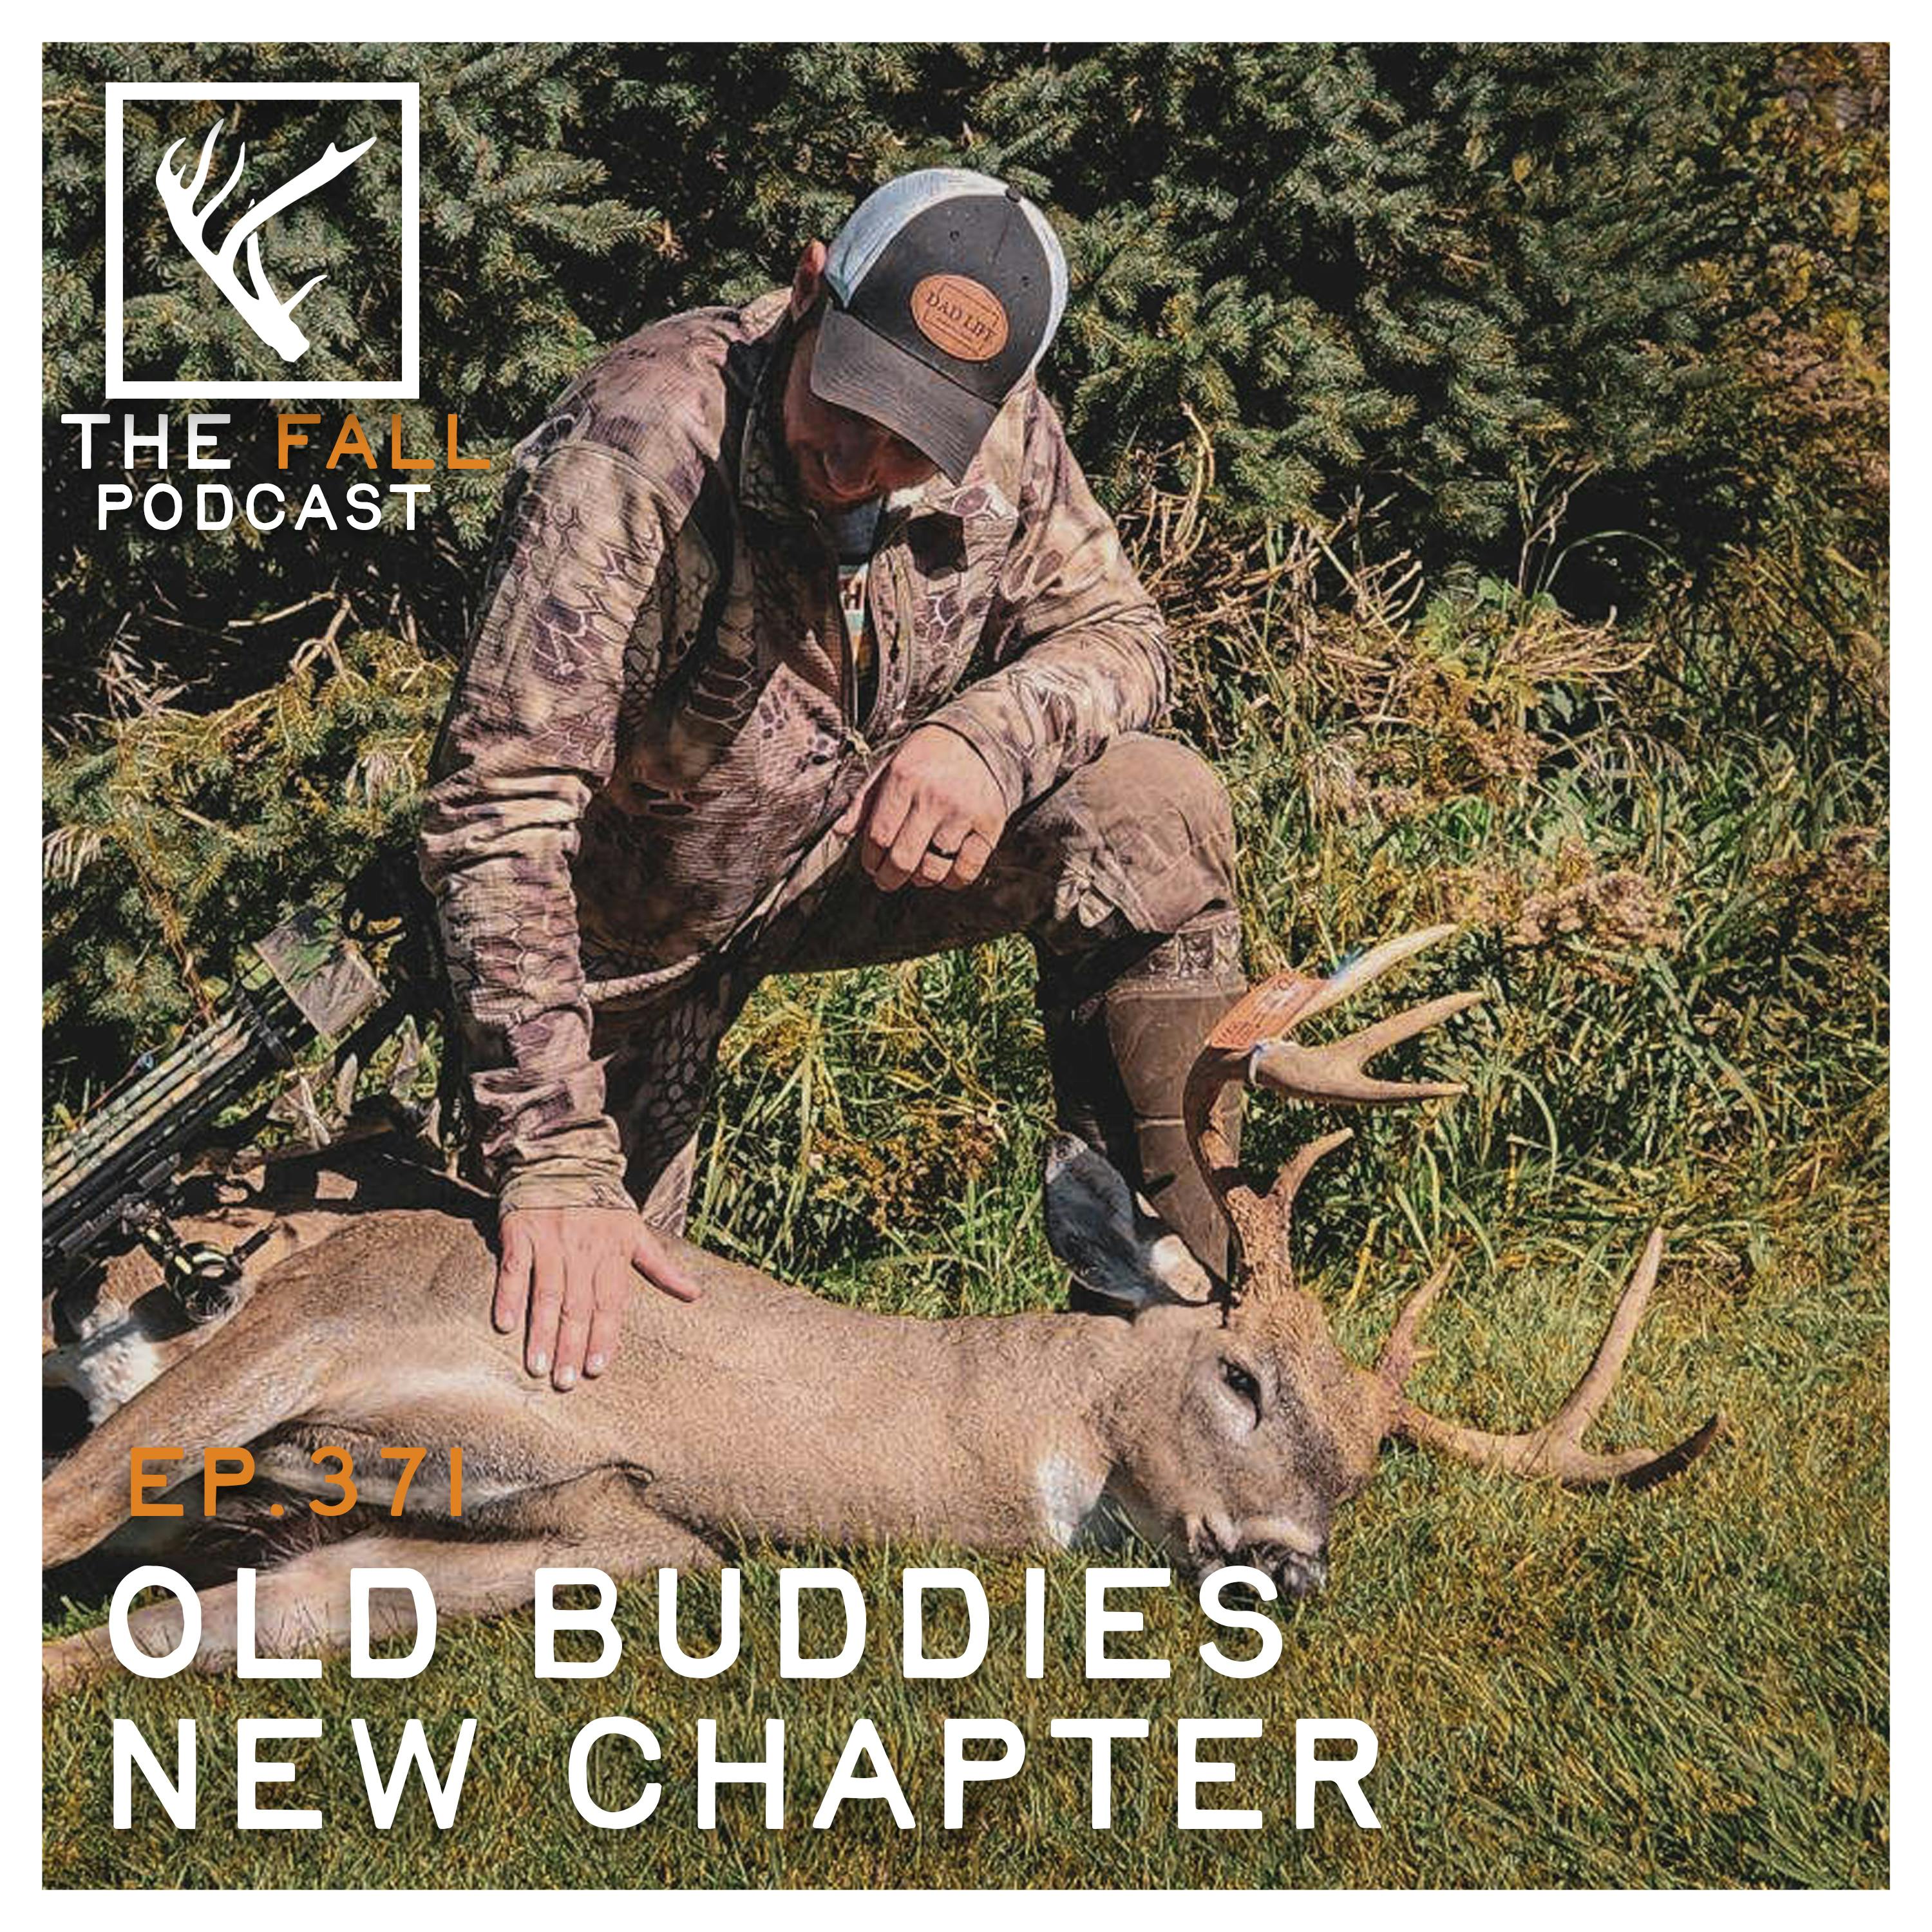 EP 371 | Old buddies, new chapter